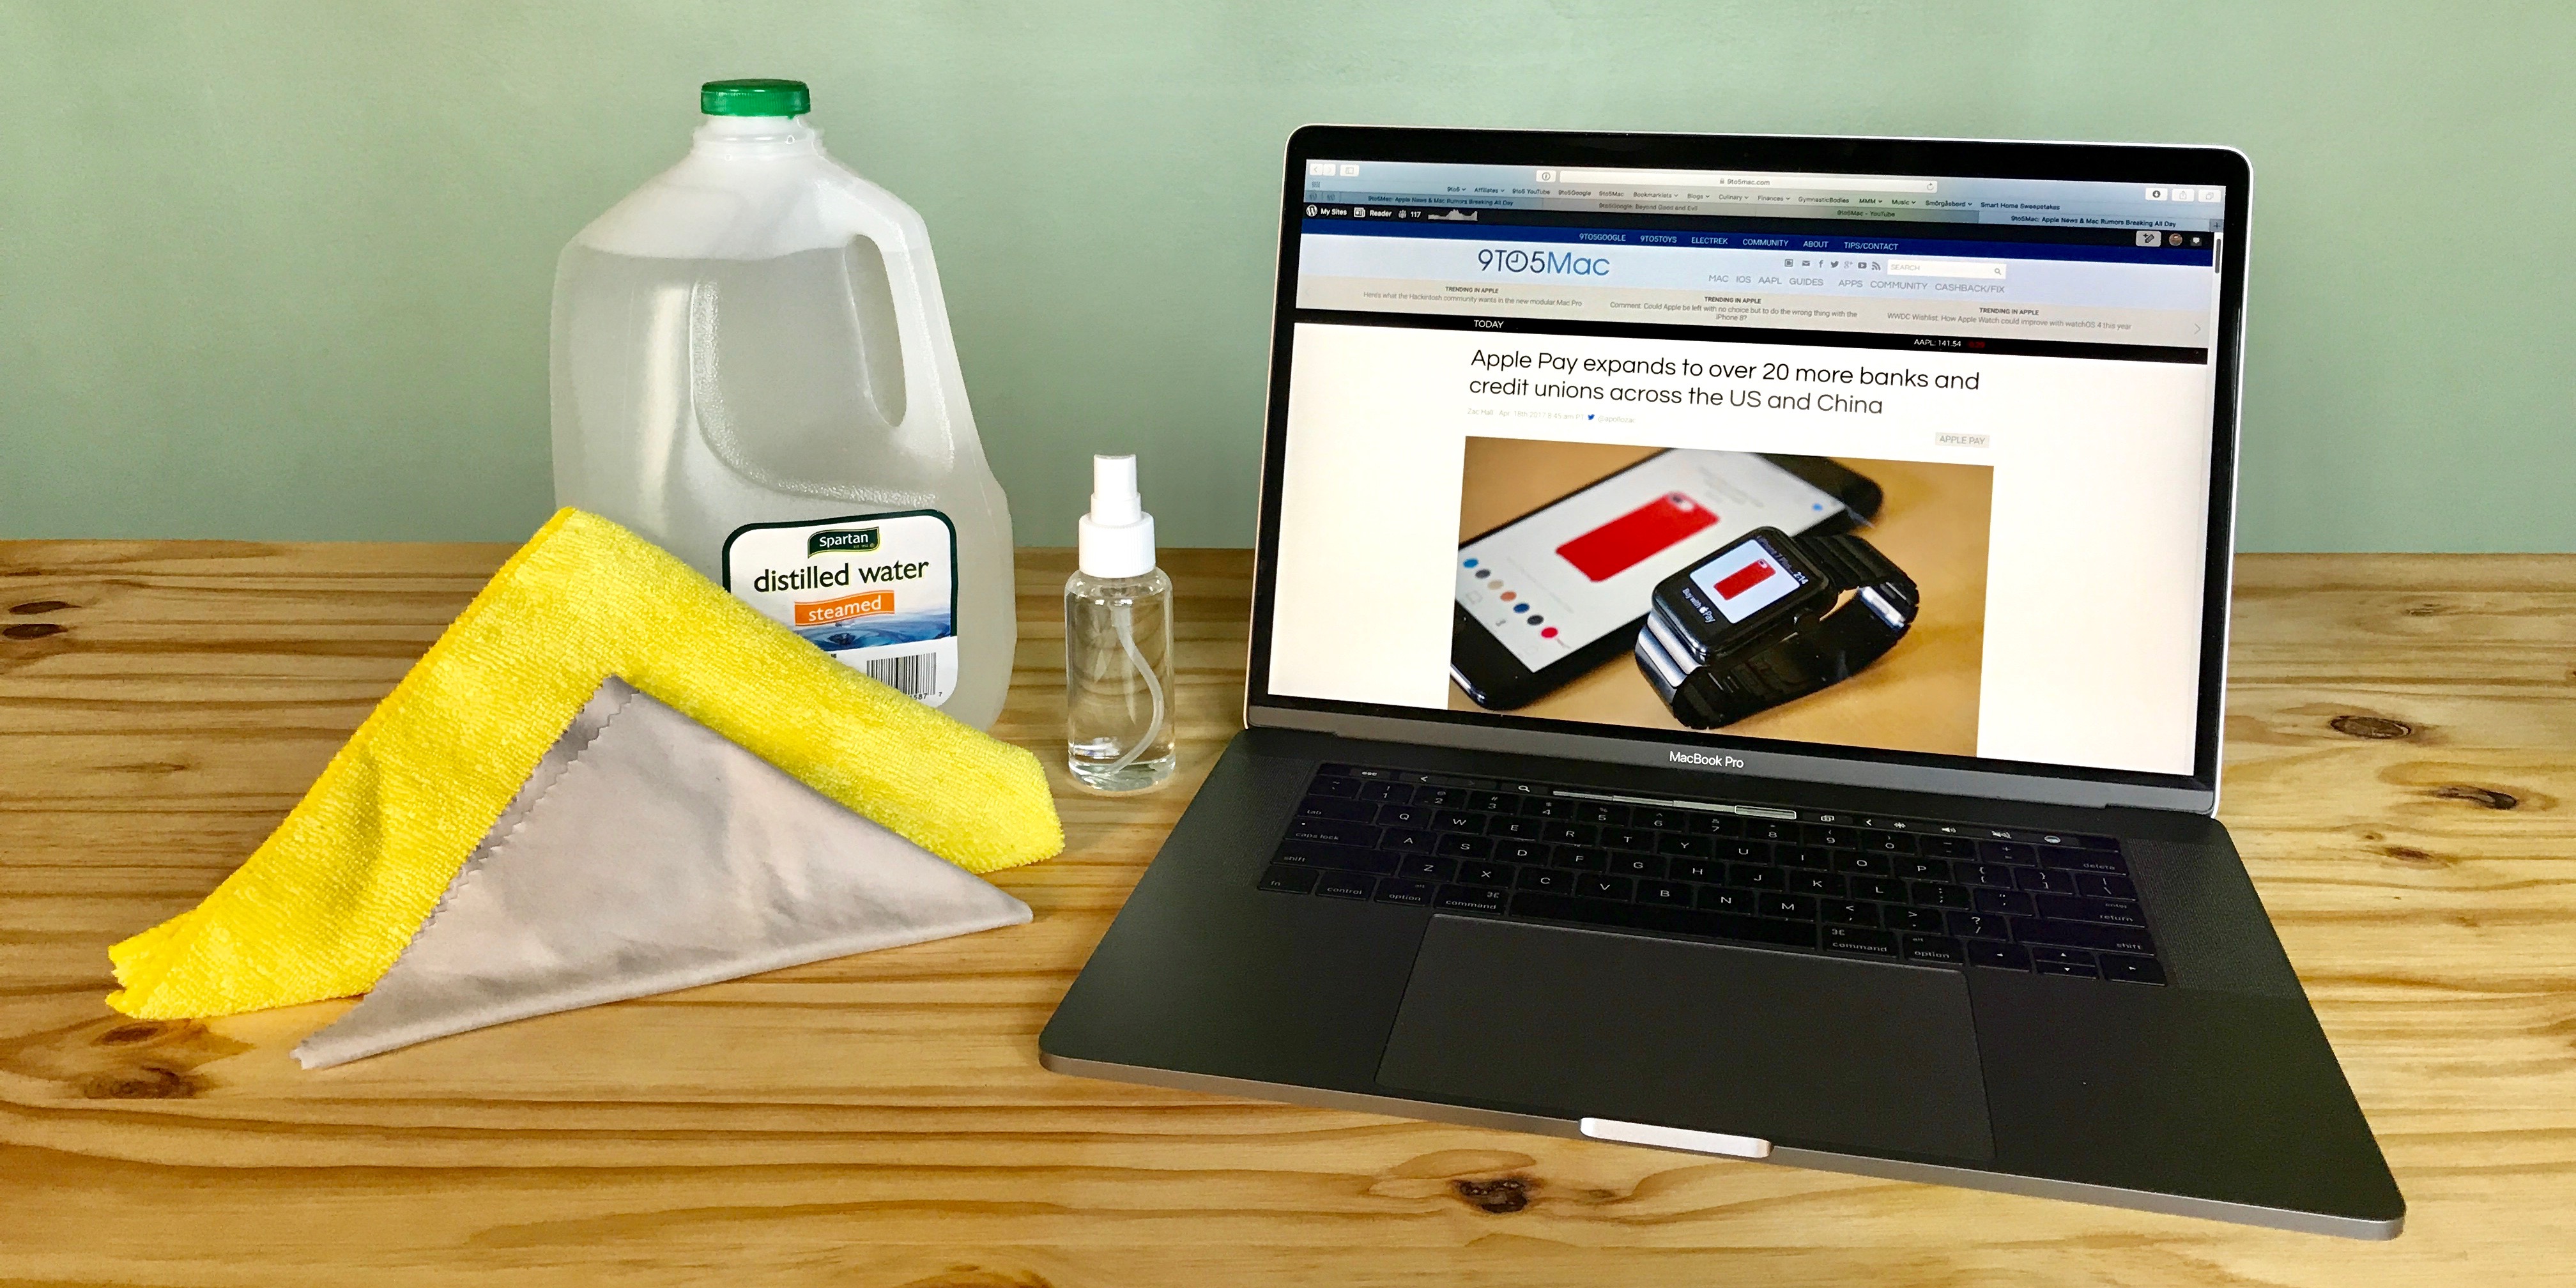 How to clean a MacBook Pro - 9to5Mac